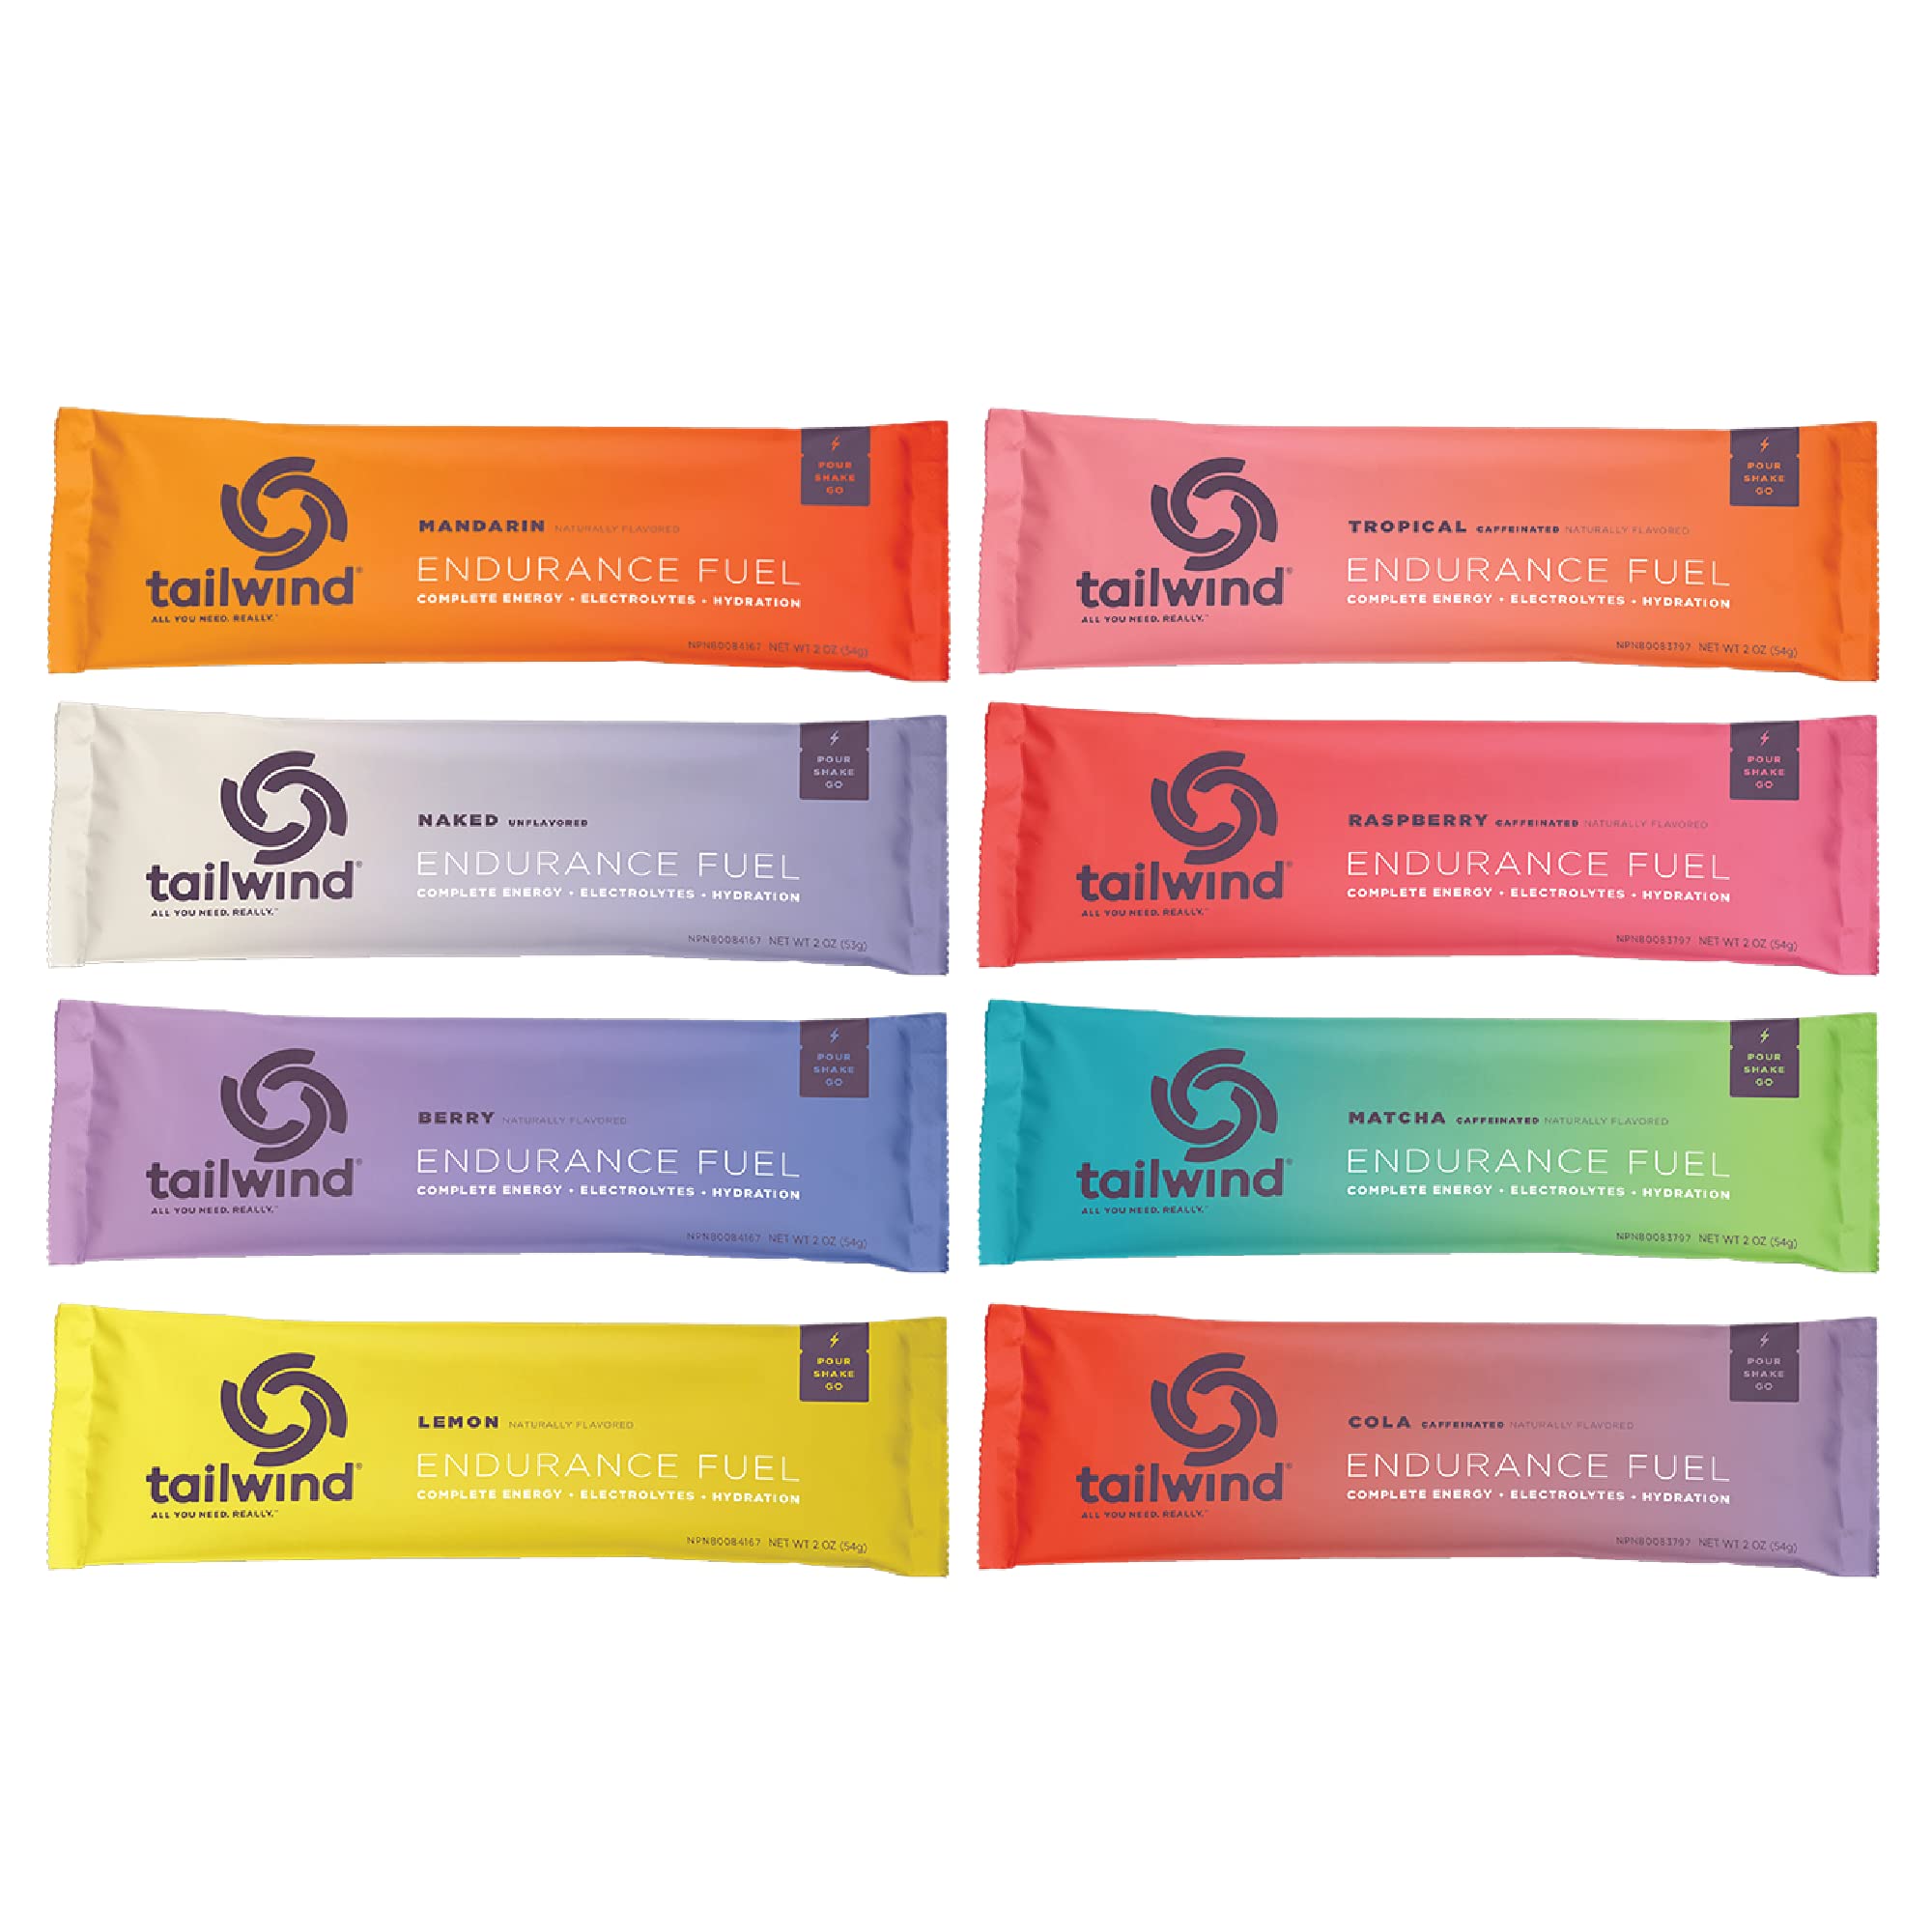 Tailwind Nutrition Endurance Fuel 8 Stickpack Starter Set for Running, Cycling, Marathon, Triathlon, Ditch the Energy Gels, Bars, Chews and try Tailwind as a replacement